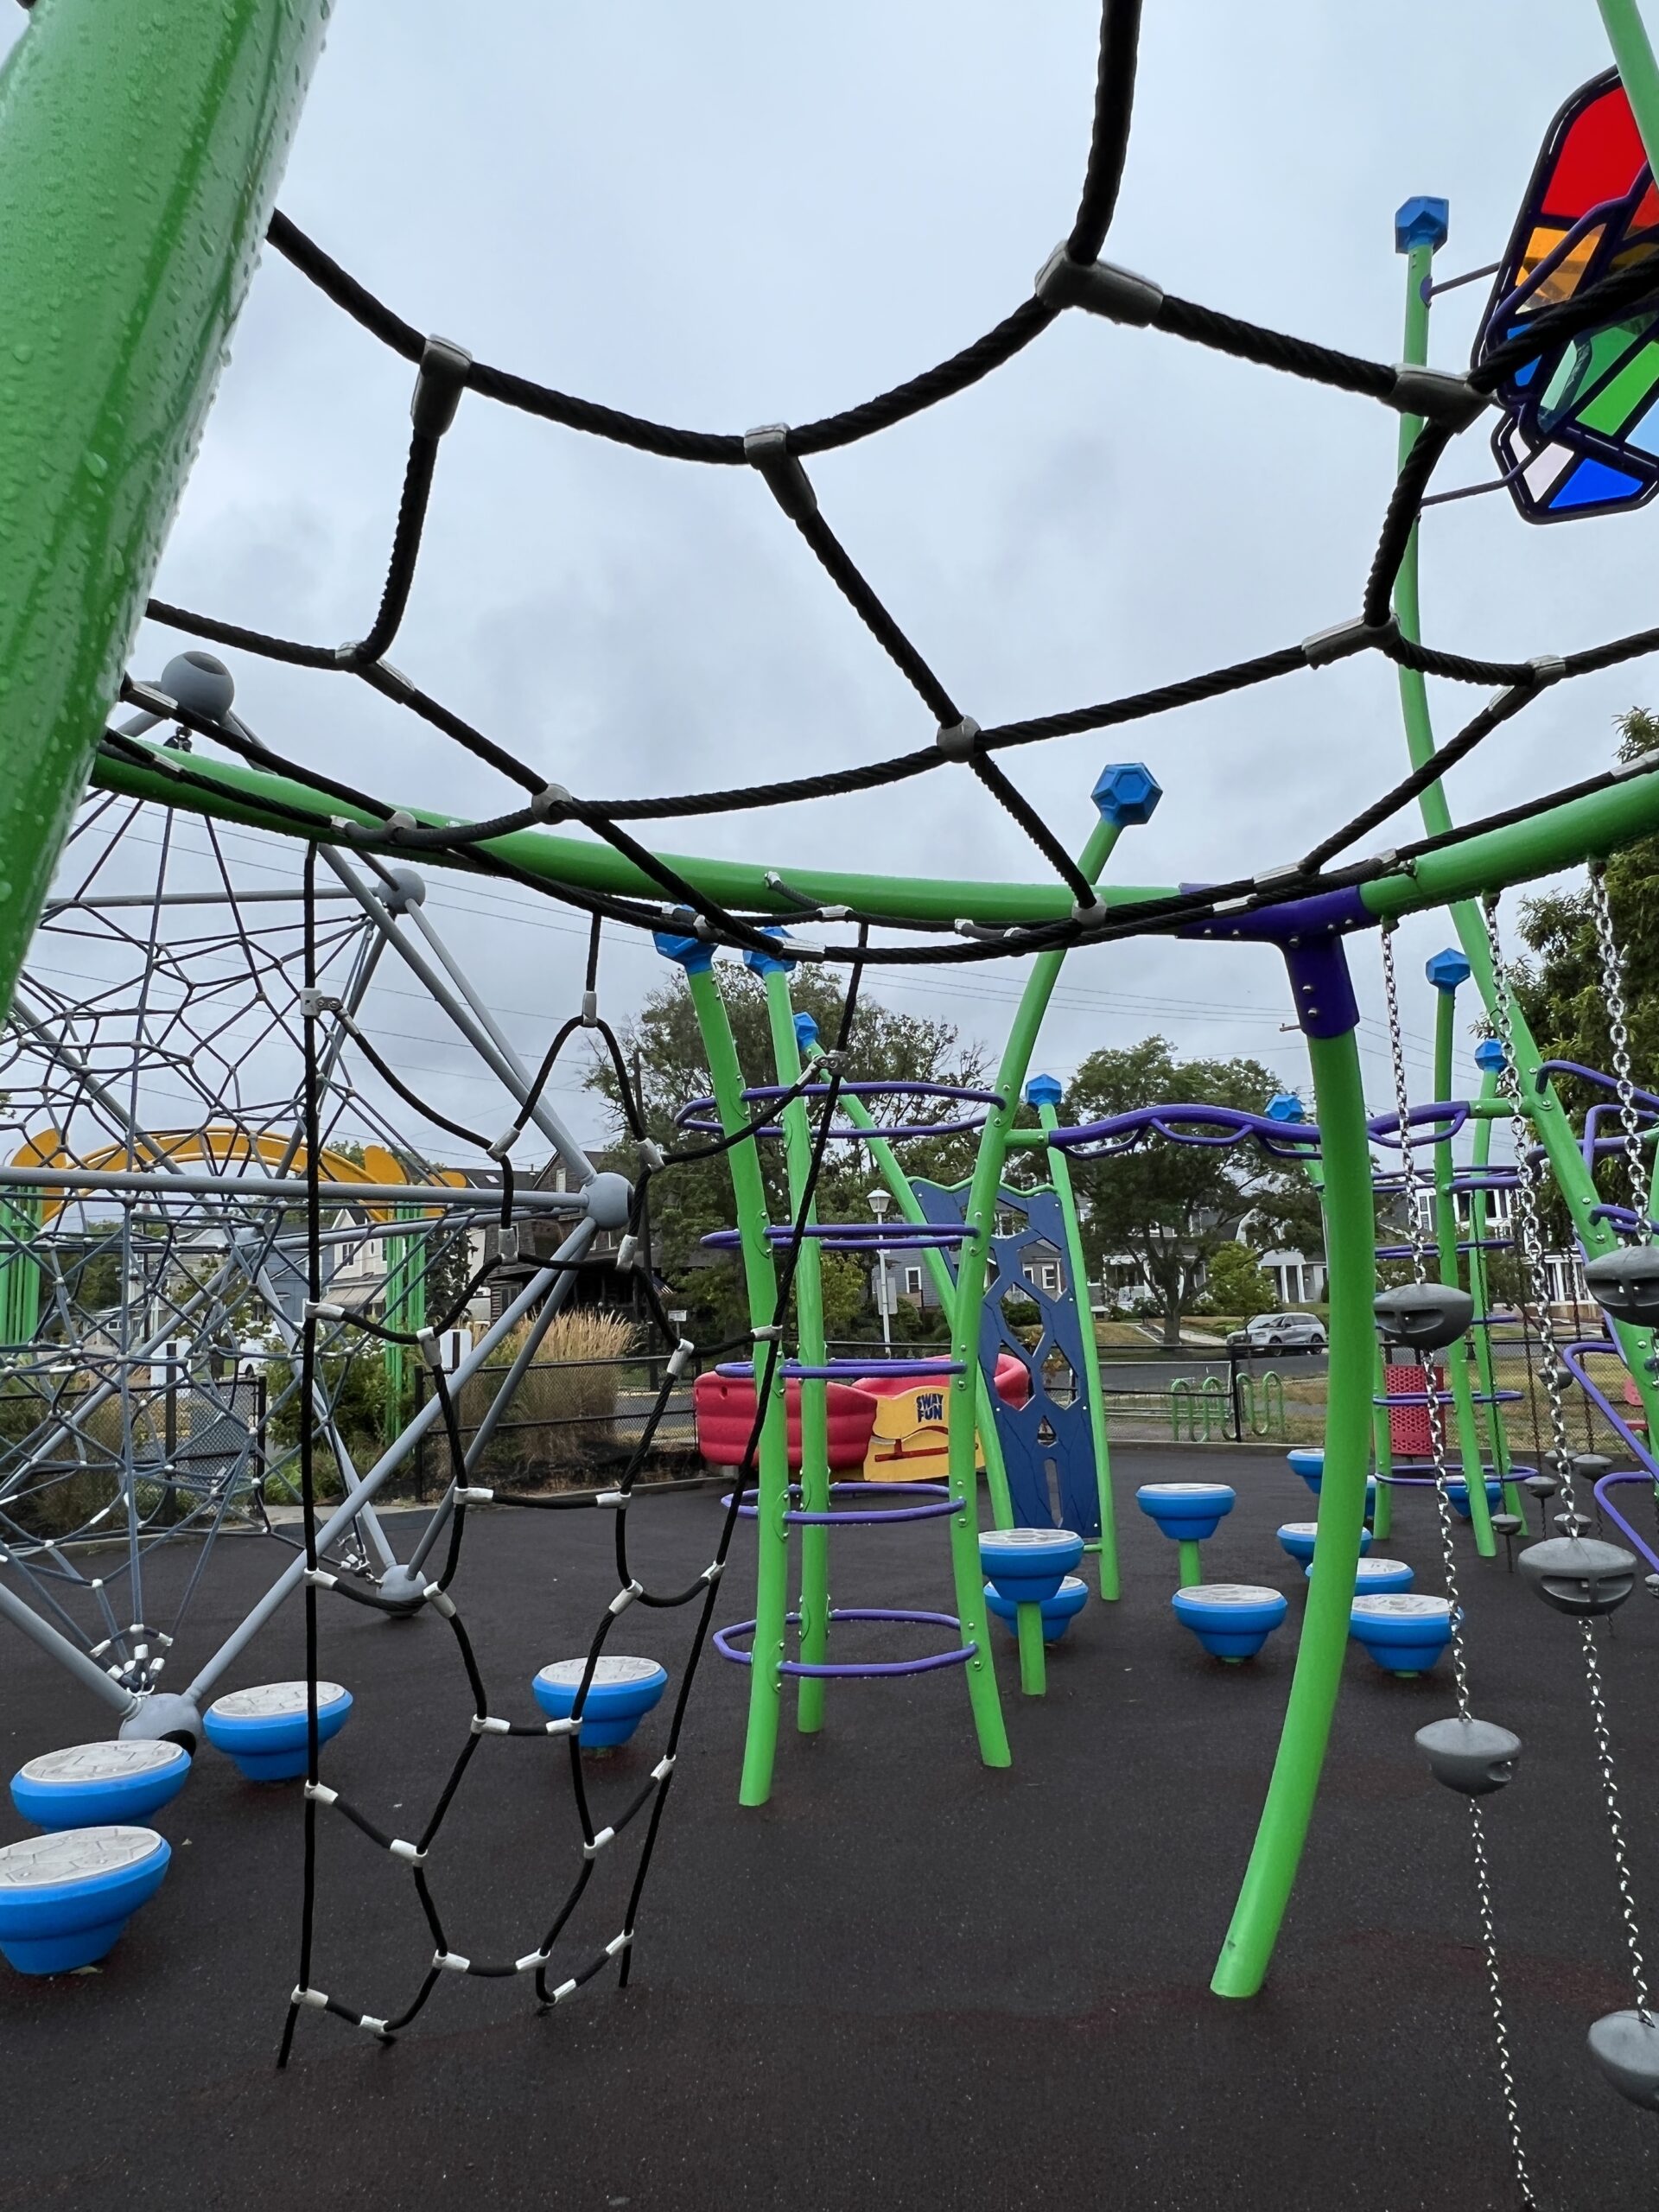 Features - Green climbing structure INSIDE TALL image at Jane Magovern's Playground in Belmar NJ